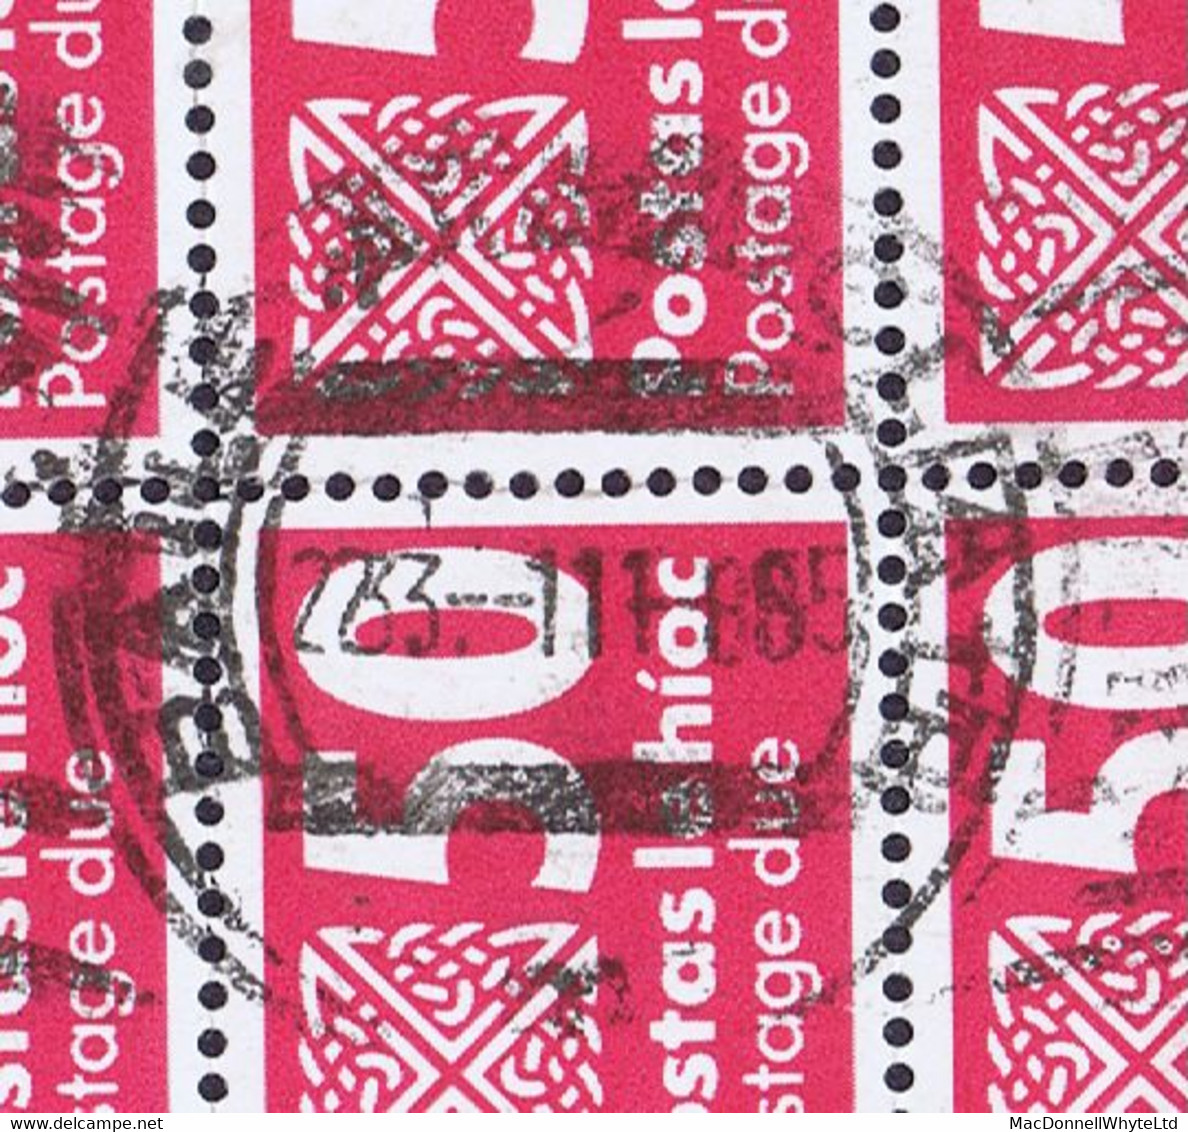 Ireland Postage Due 1985 50p Cerise Used Block Of 20 Cancelled Dublin Roller BAILE ATHA CLIATH 23 11 85, Two Damaged - Postage Due